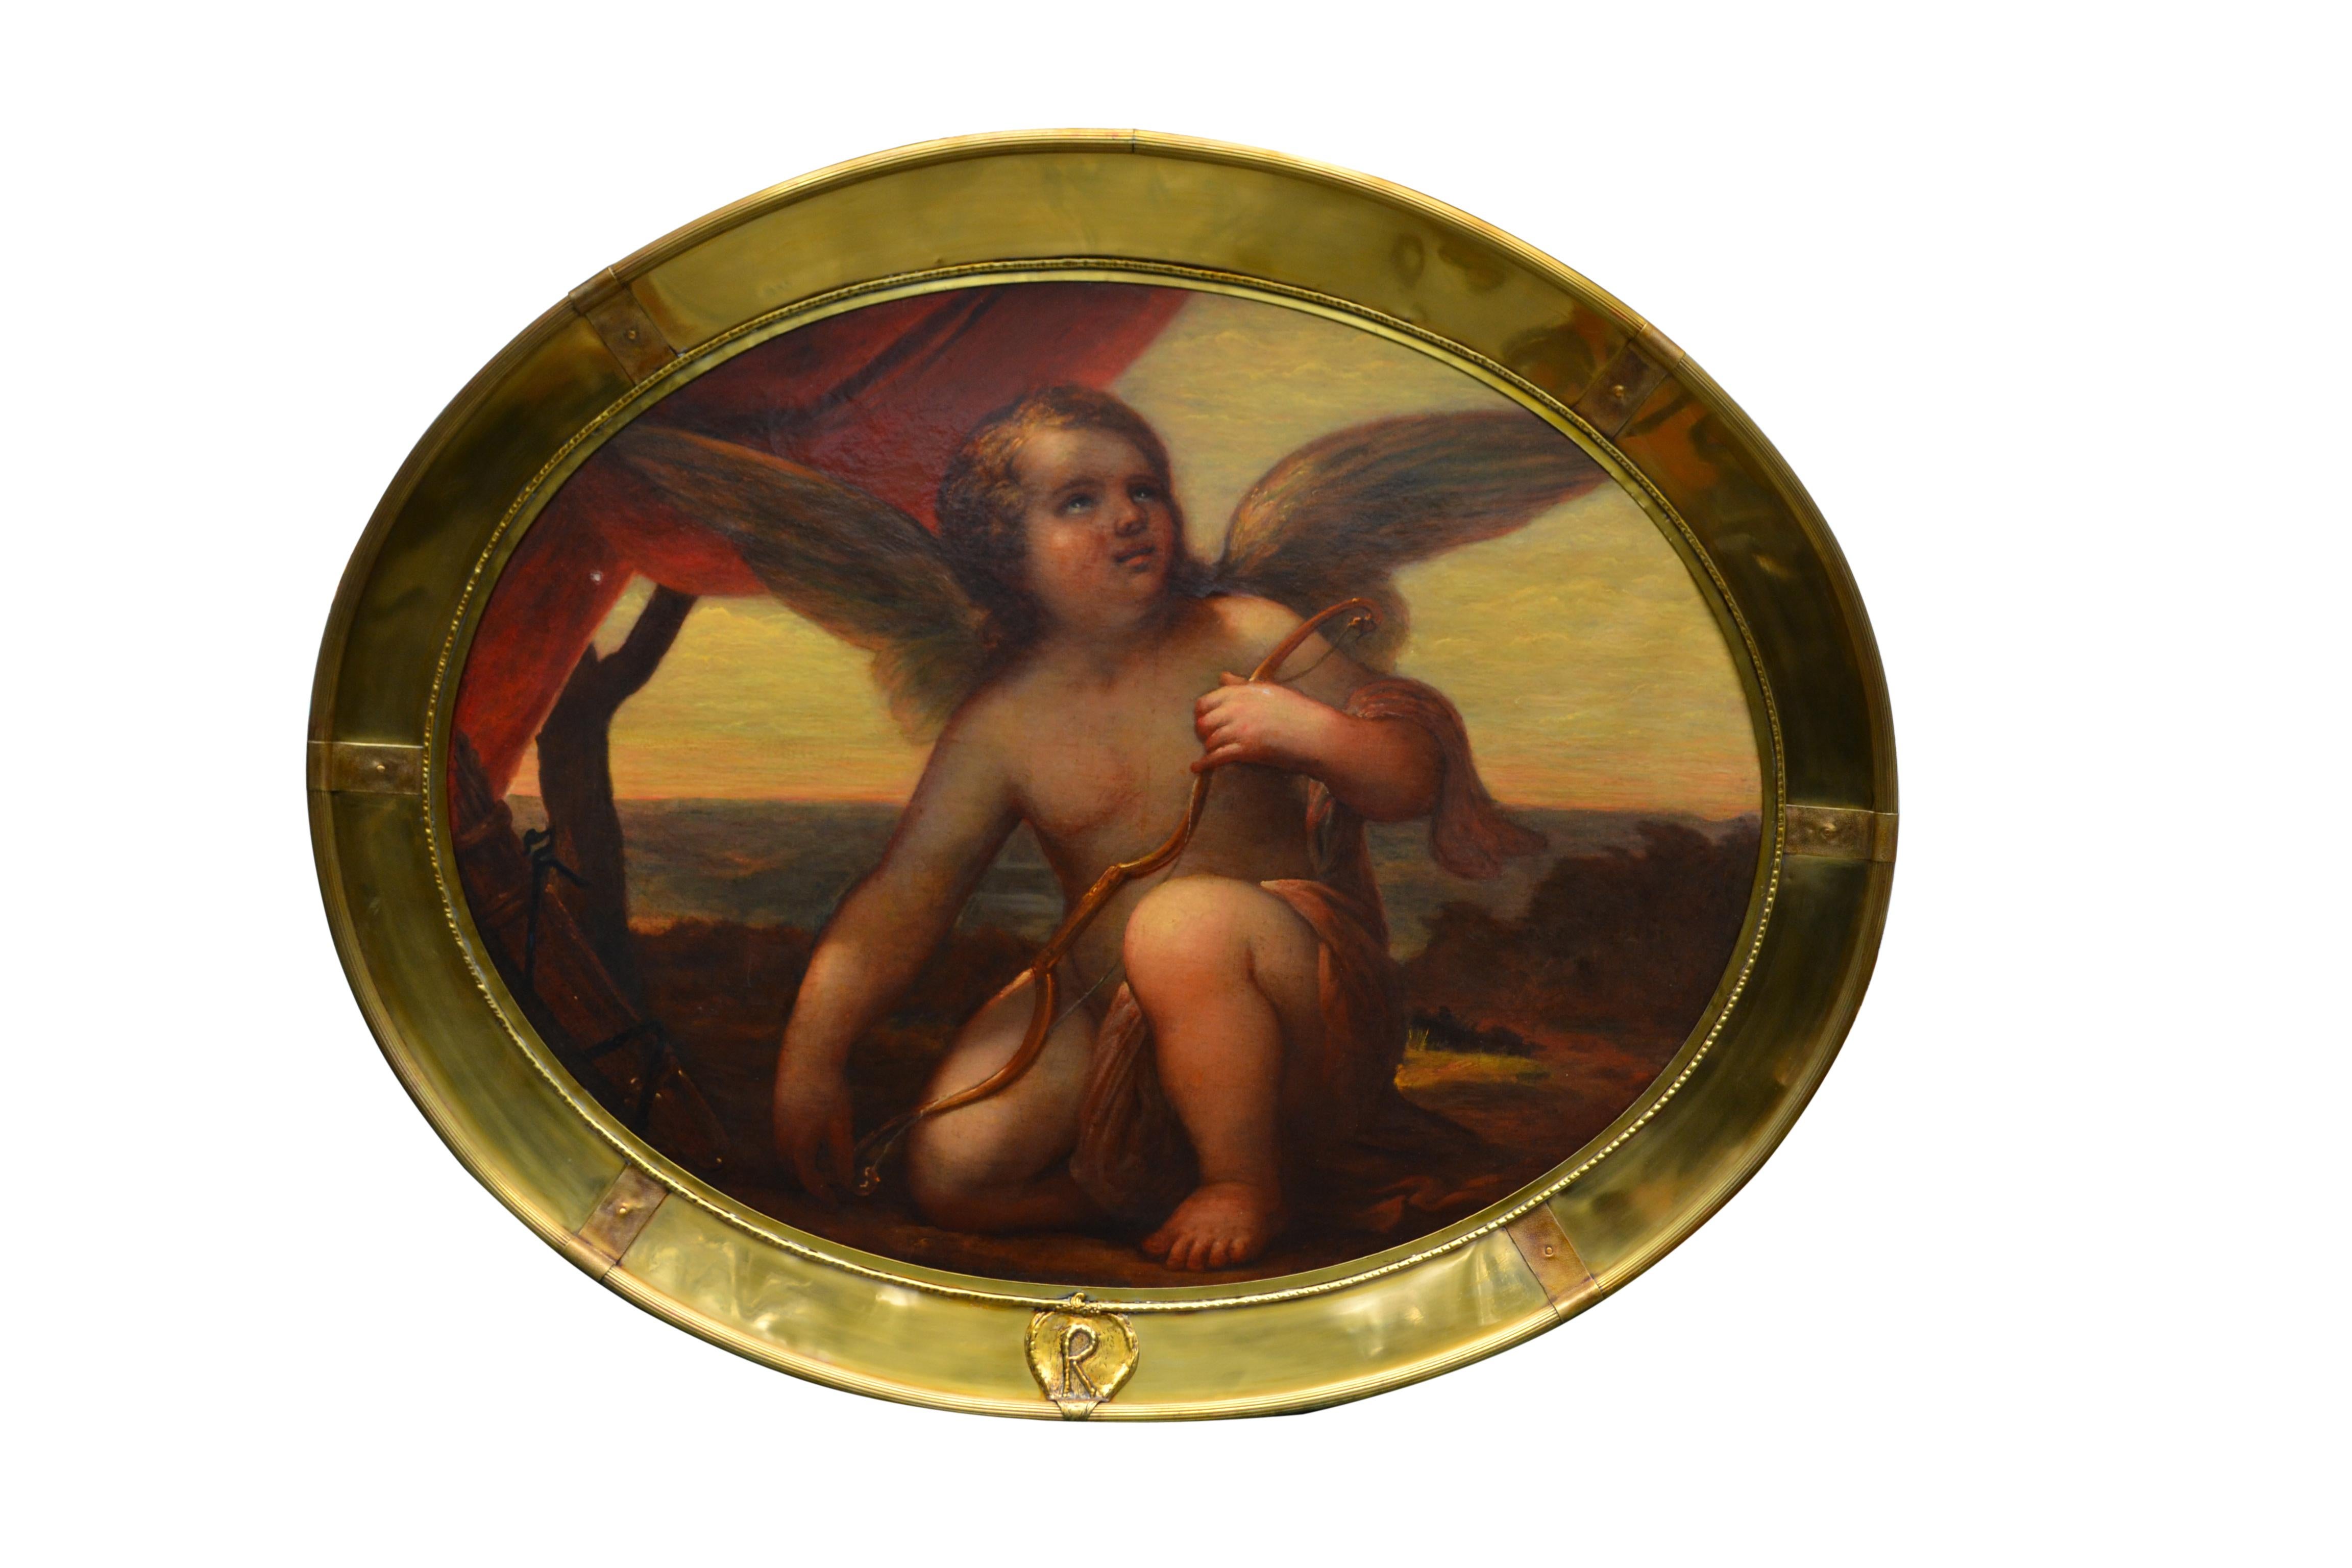 A fine and rare painting of a kneeling cupid holding a quiver, shown against an idyllic background. The style and subject matter are similar to works by Venetian masters from the 16th through 17th century. Restorers presently indicate that this